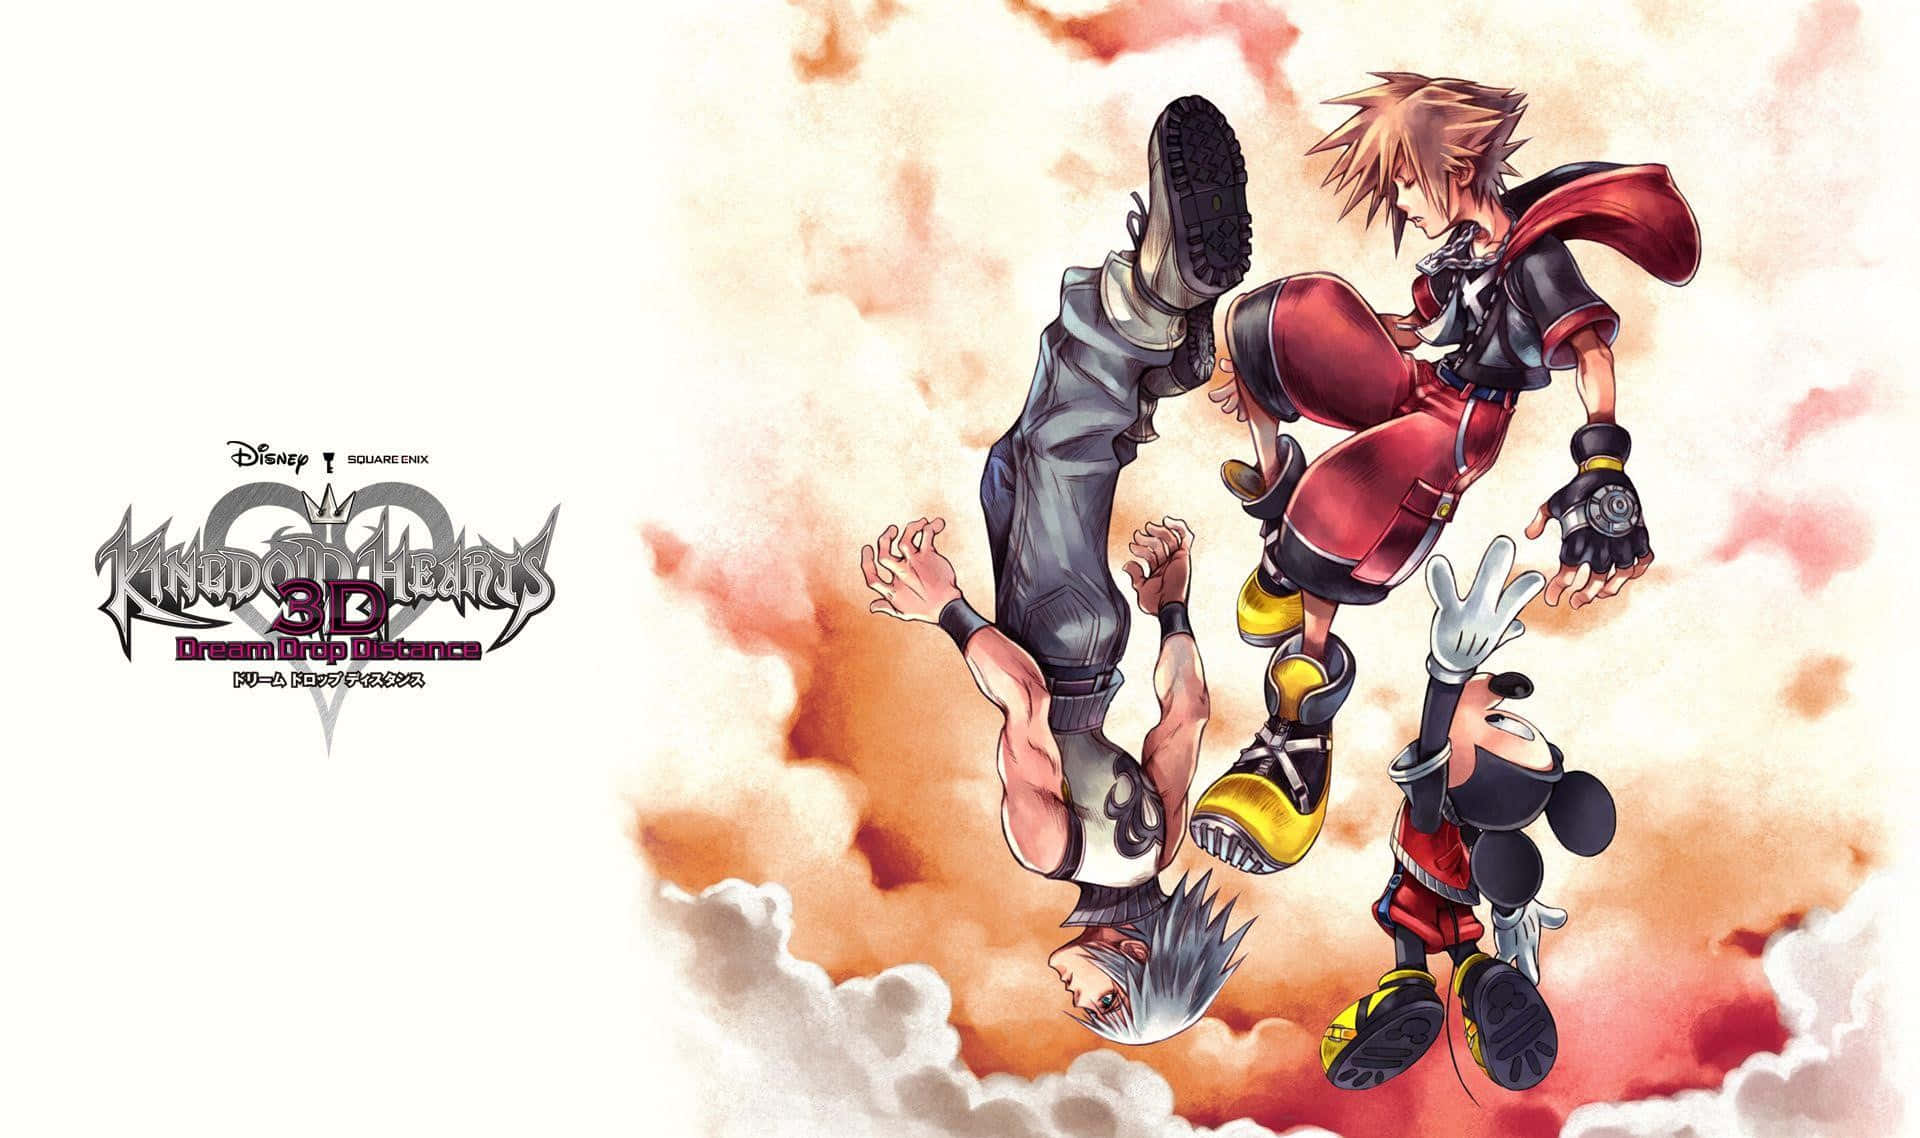 Riku, a powerful Keyblade wielder from Kingdom Hearts, stands tall and ready for battle. Wallpaper